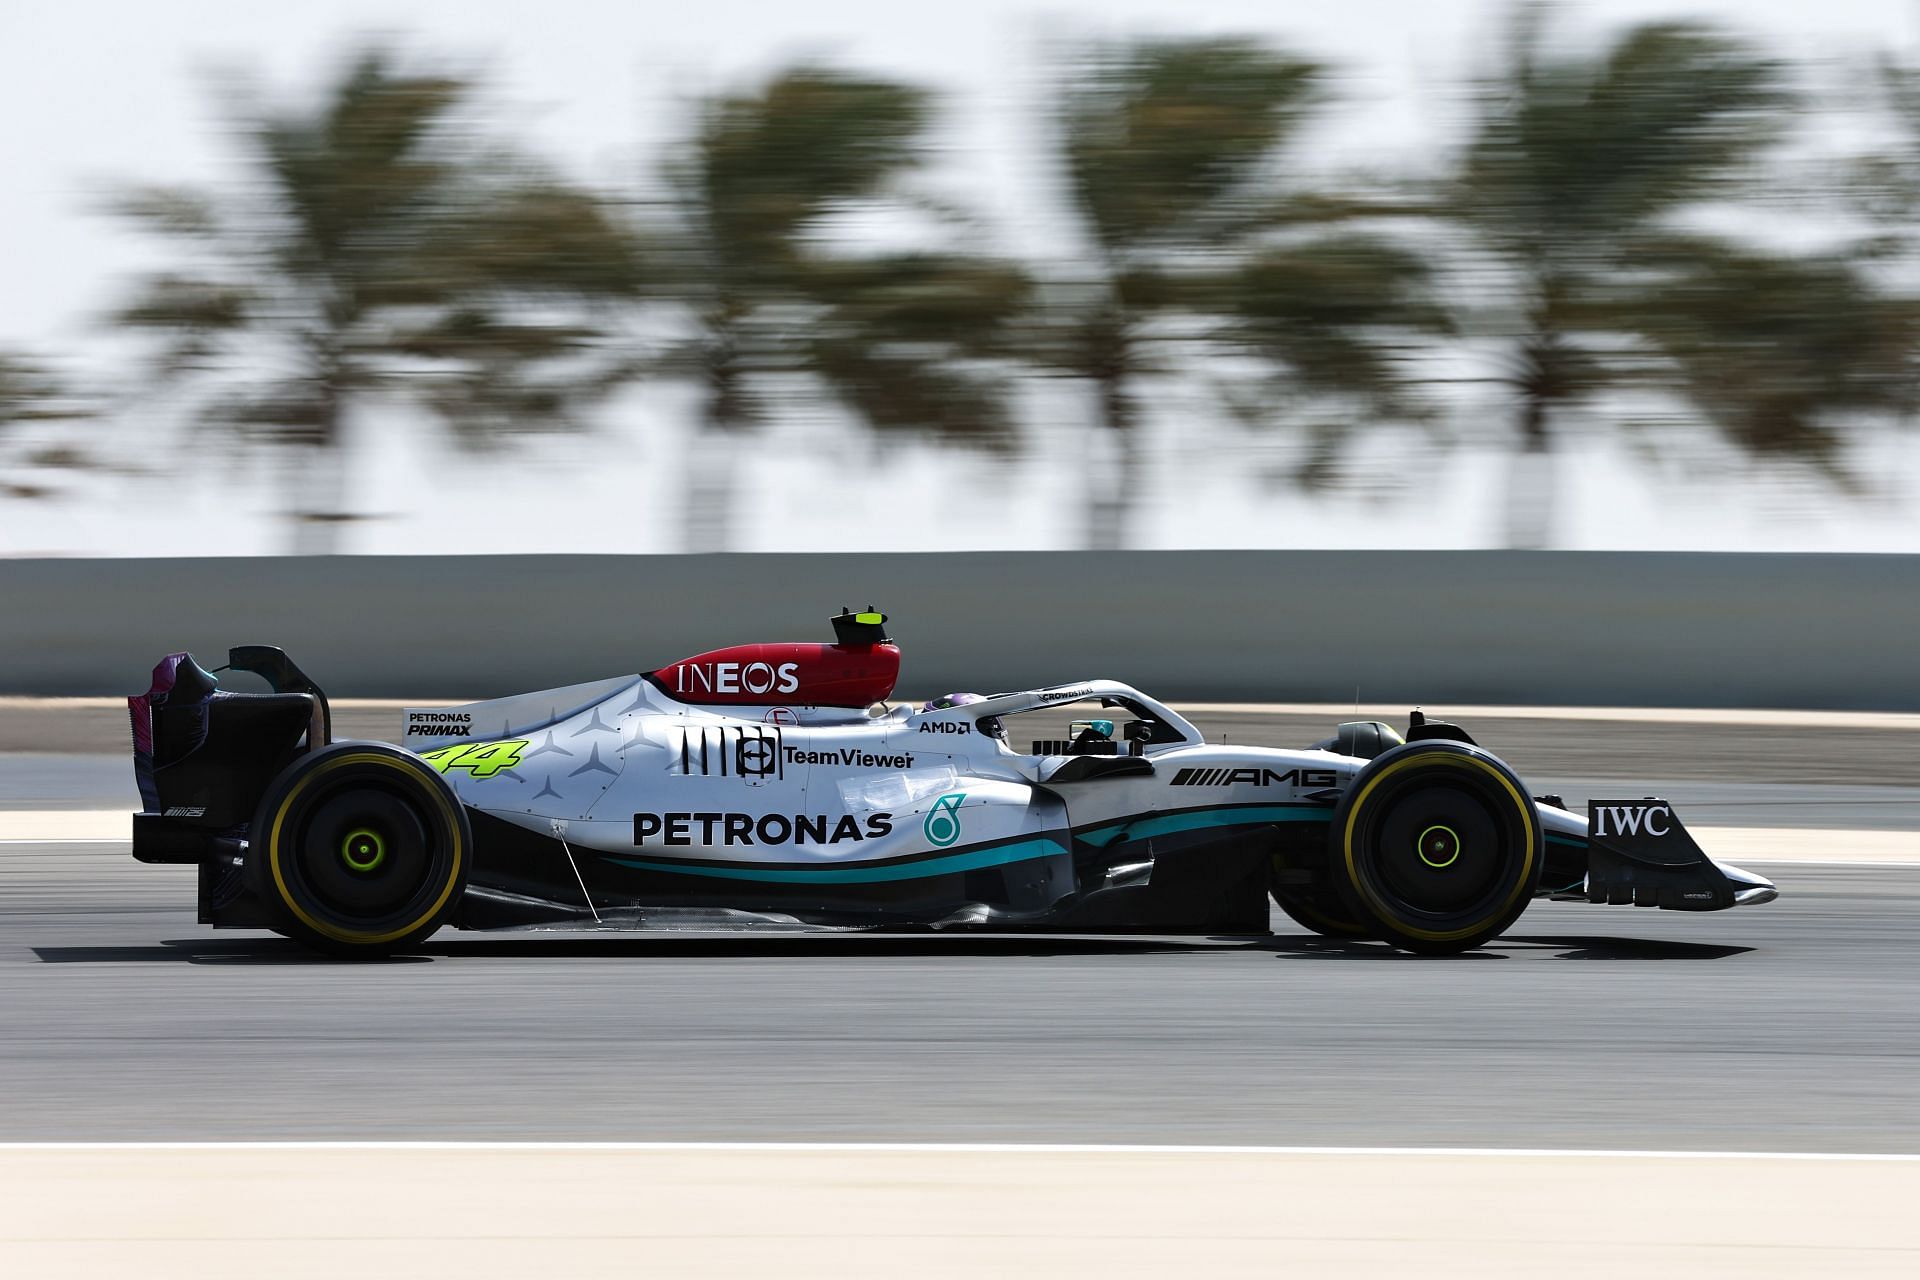 Lewis Hamilton out on track during Day 3 of pre-season testing in Bahrain (Photo by Lars Baron/Getty Images)